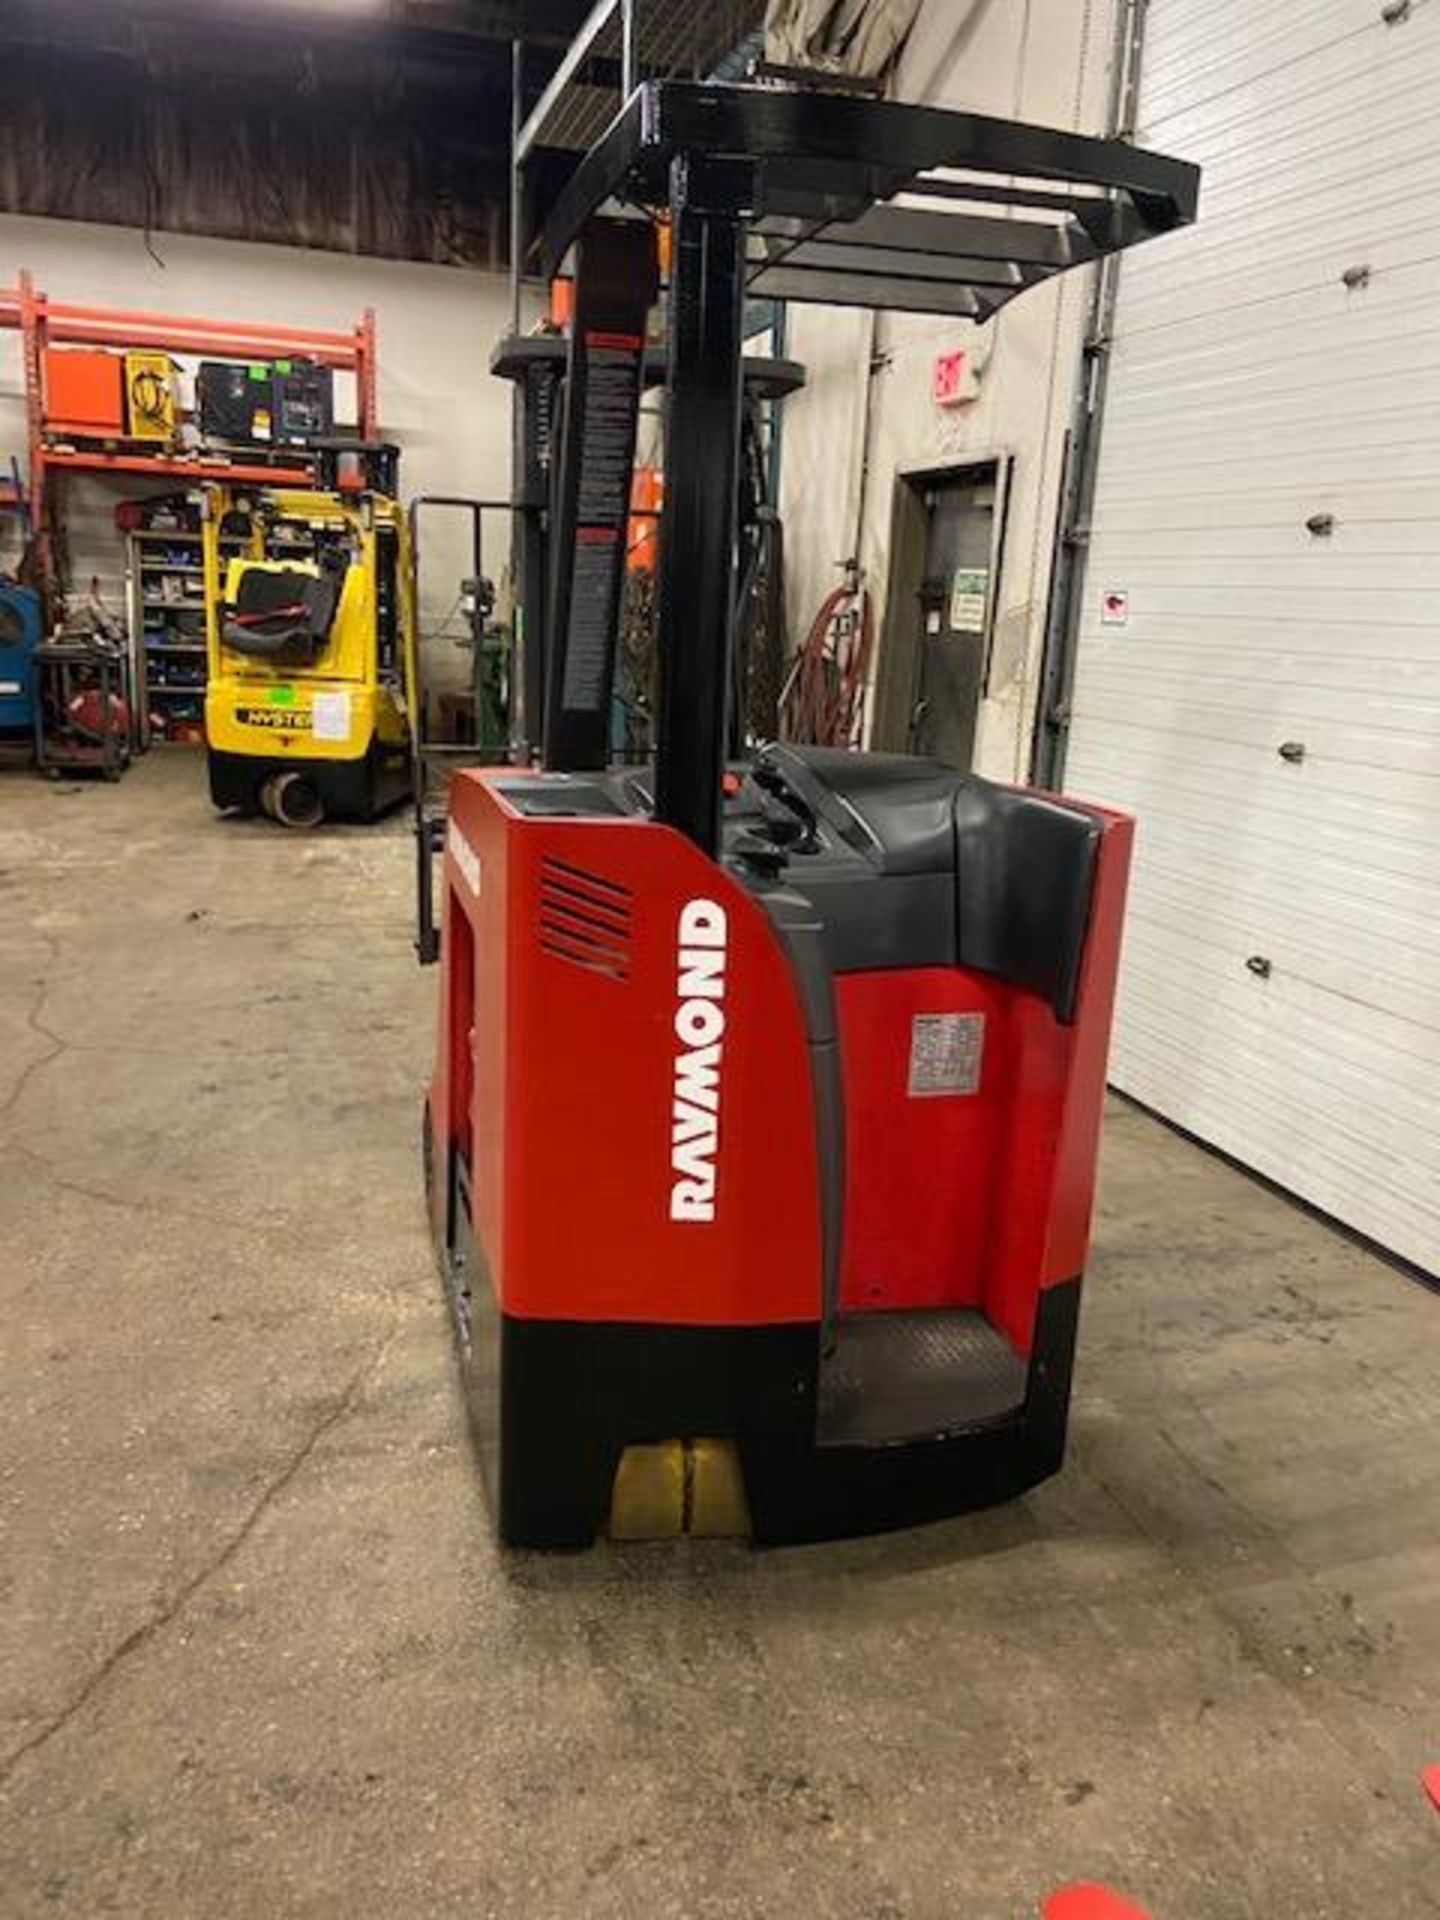 FREE CUSTOMS - 2015 Raymond 5000lbs Capacity Stand On Forklift Electric with 3-STAGE MAST sideshift - Image 3 of 3